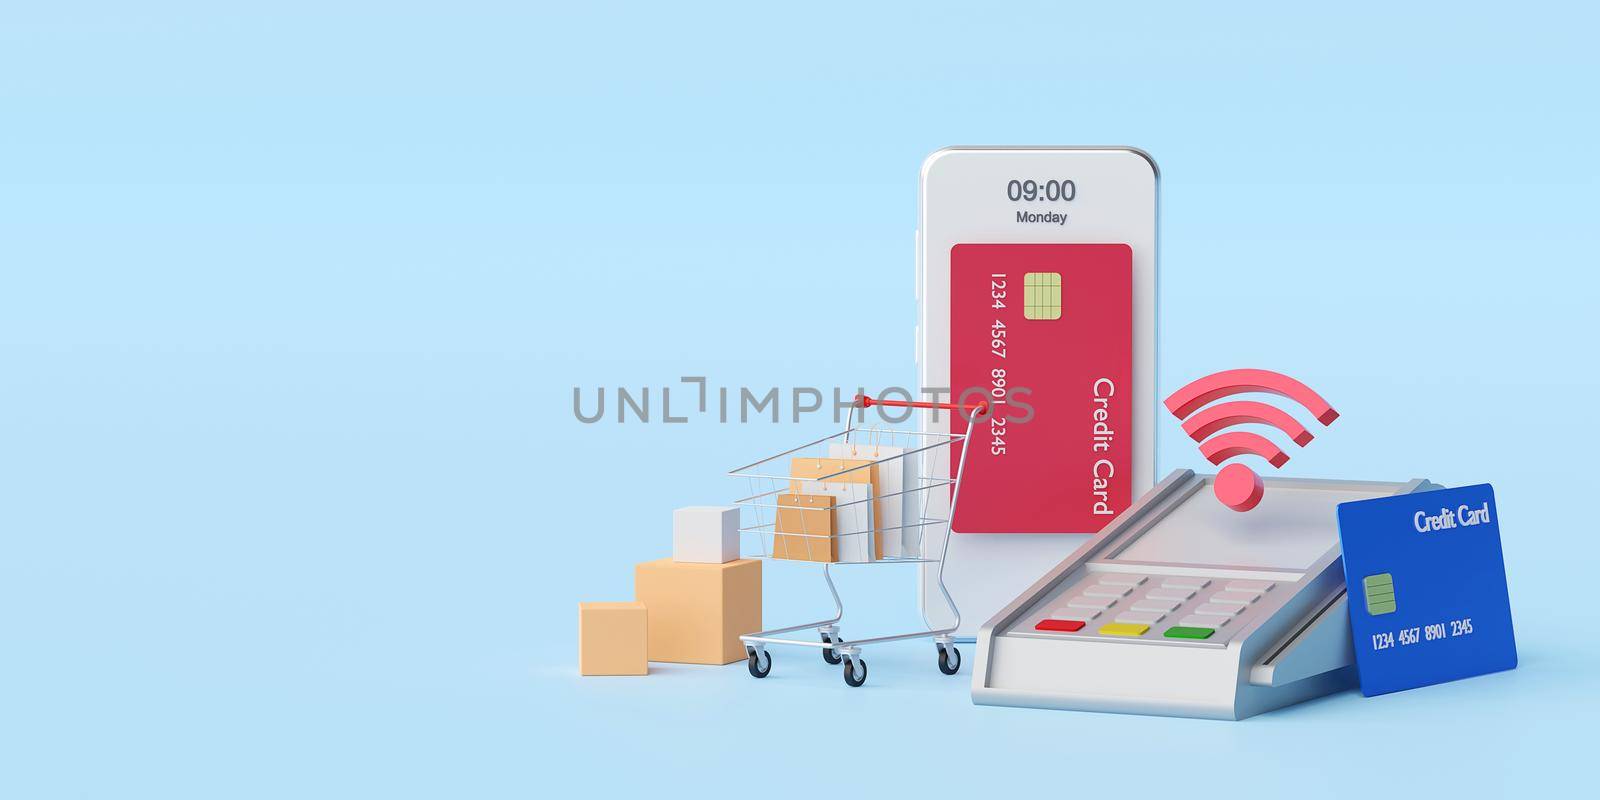 Contactless payment via NFC technology wireless pay by credit card on smartphone, 3d rendering by nutzchotwarut